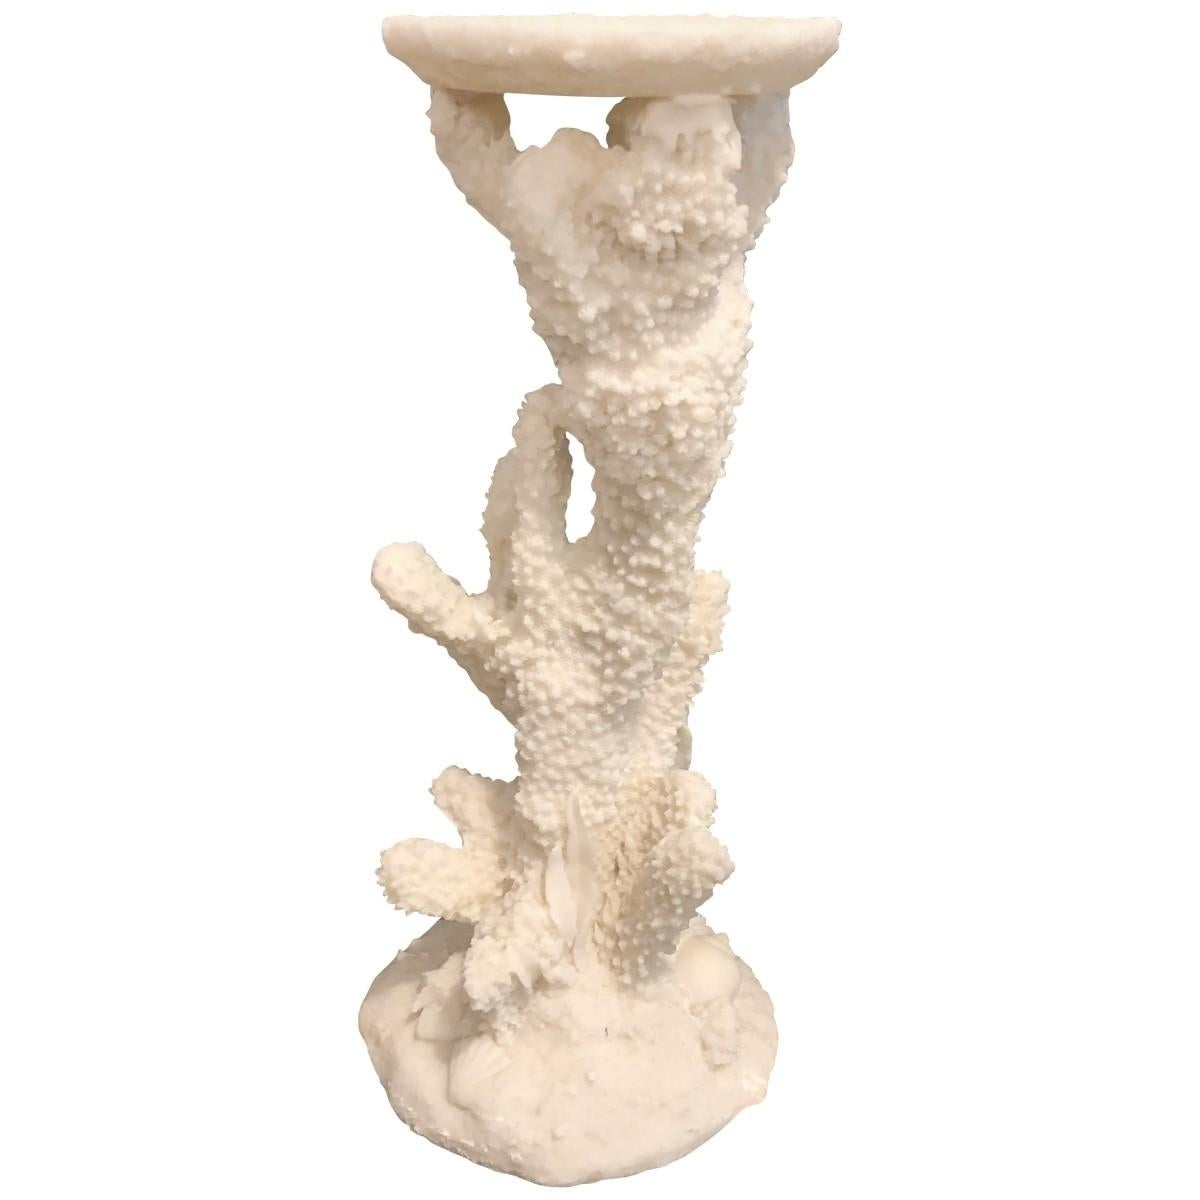 Eclectic design derives ideas, style, or taste from a broad and diverse range of sources. Done in an aquatic theme, these carved candlesticks are a distinctive set. Their coral-form stems are decorated with shells and aquatic plant life for a unique